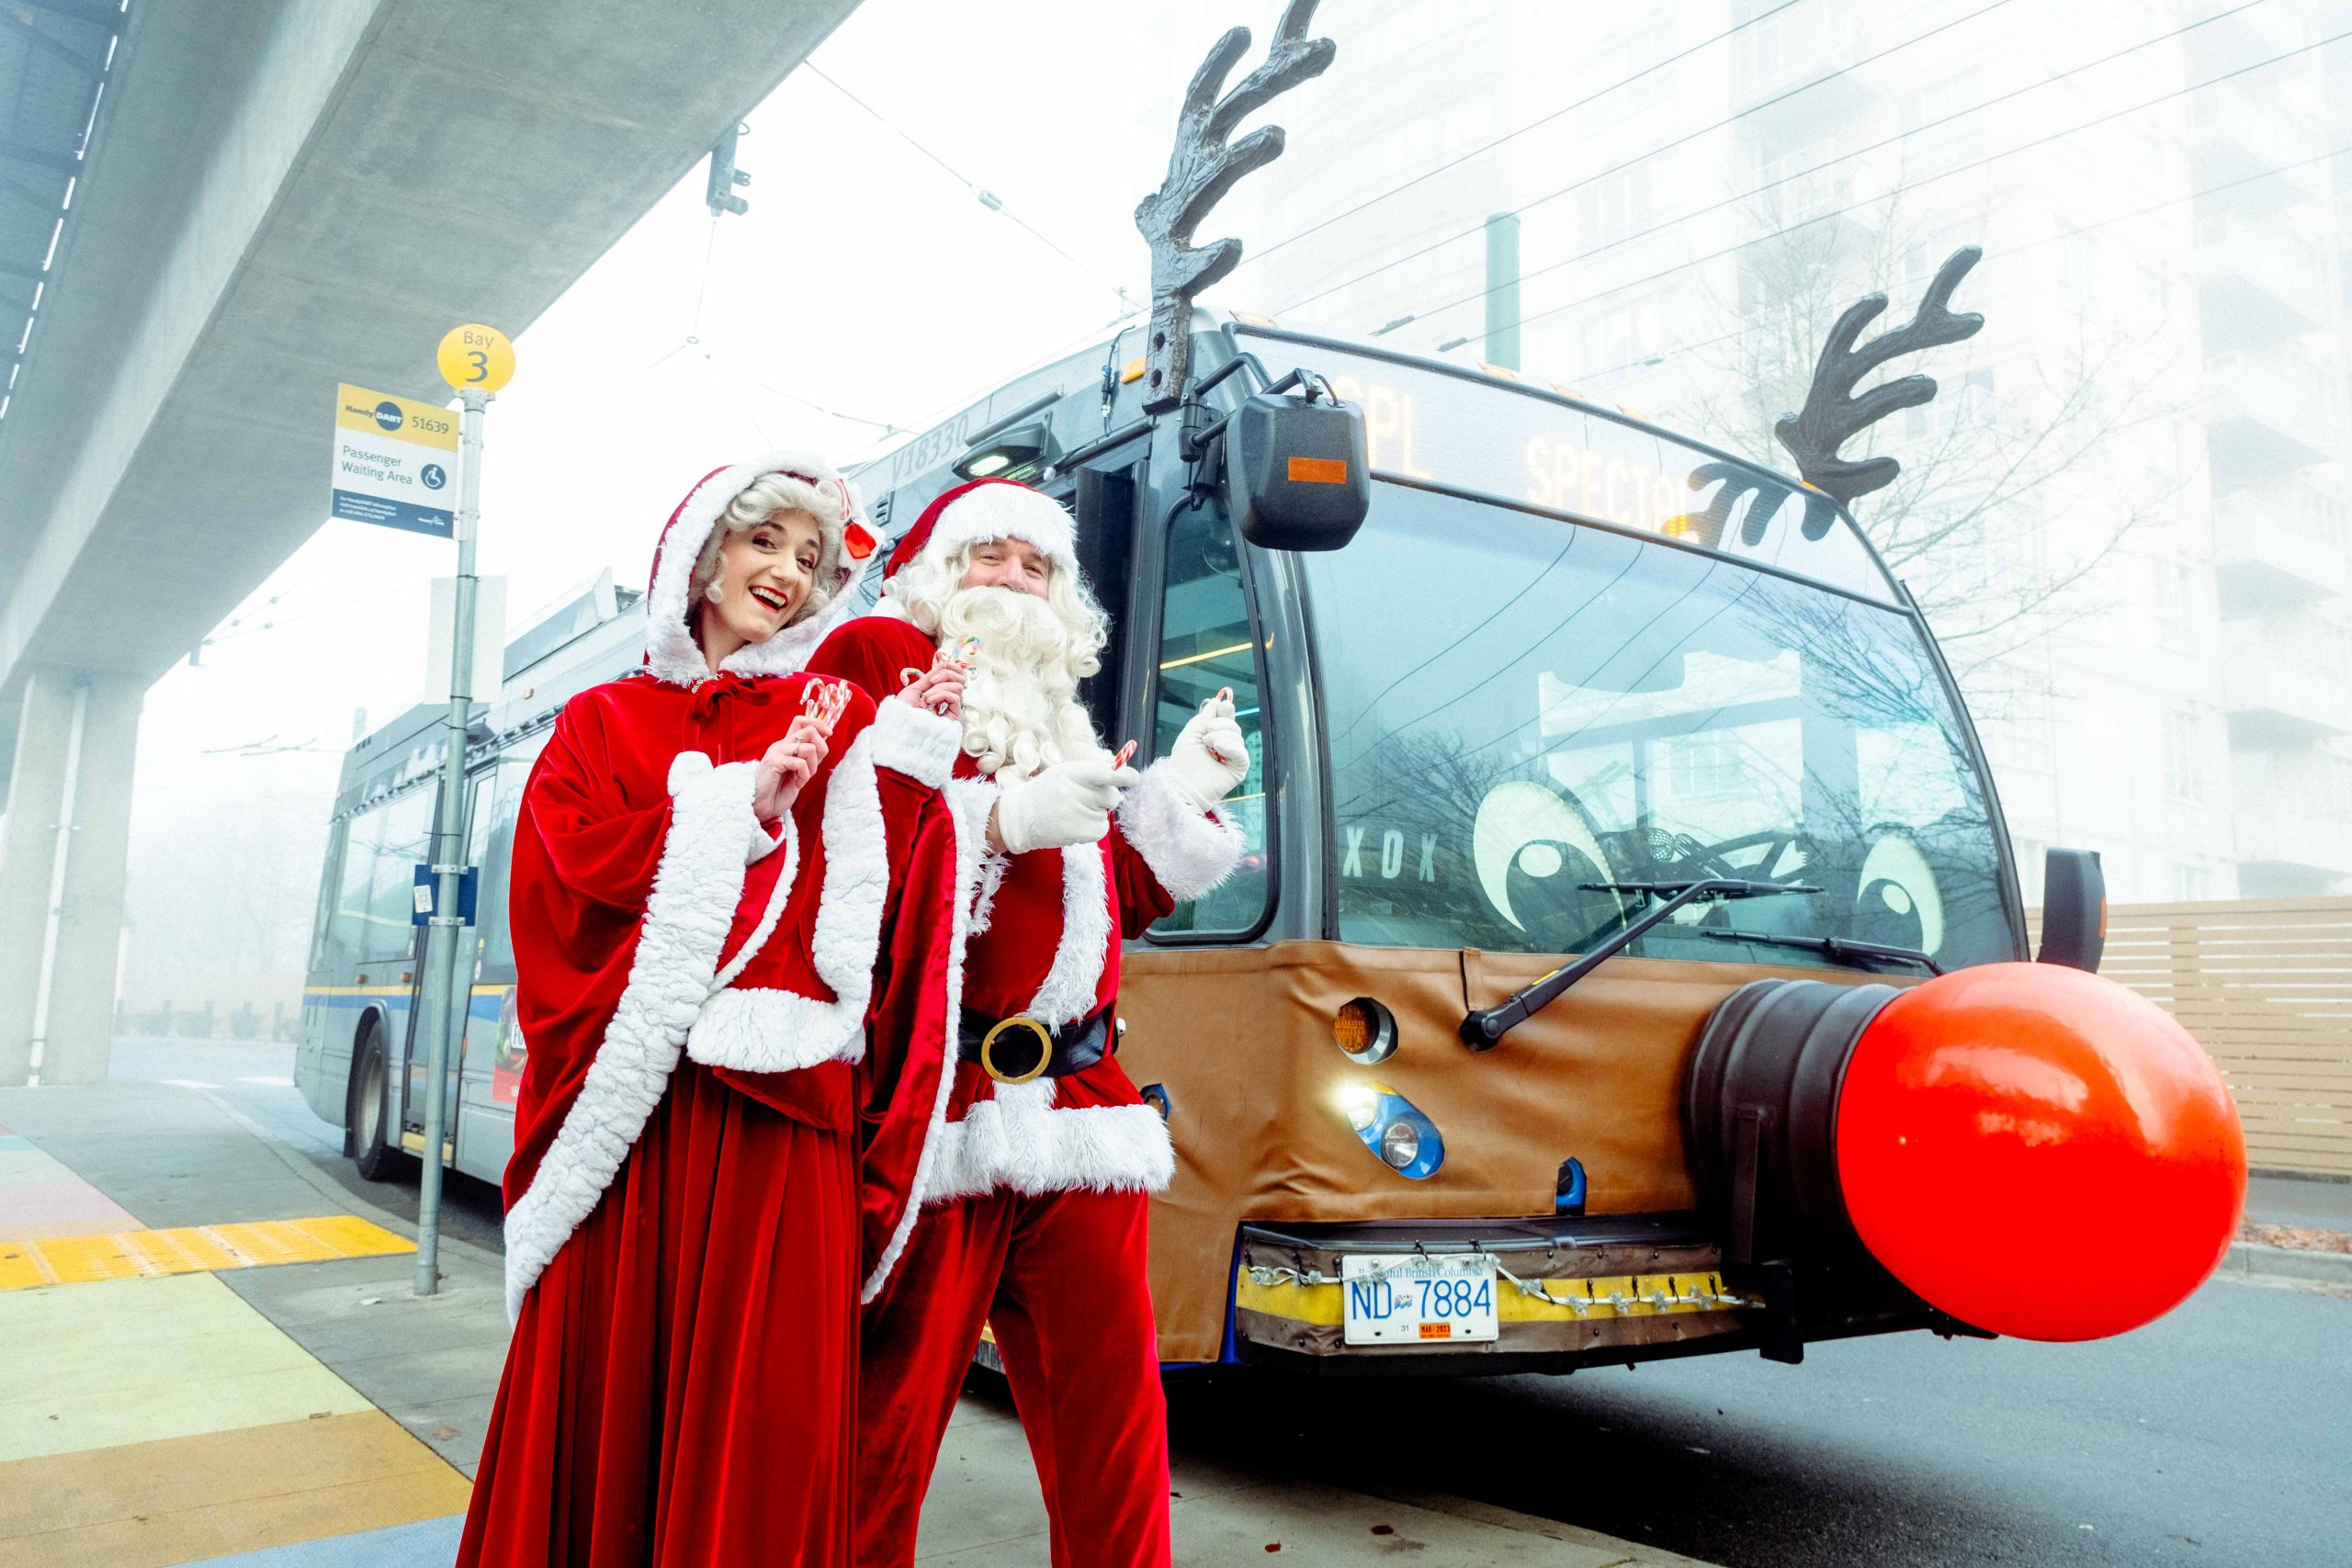 Mr. and Mrs. Claus in front of the Reindeer Bus